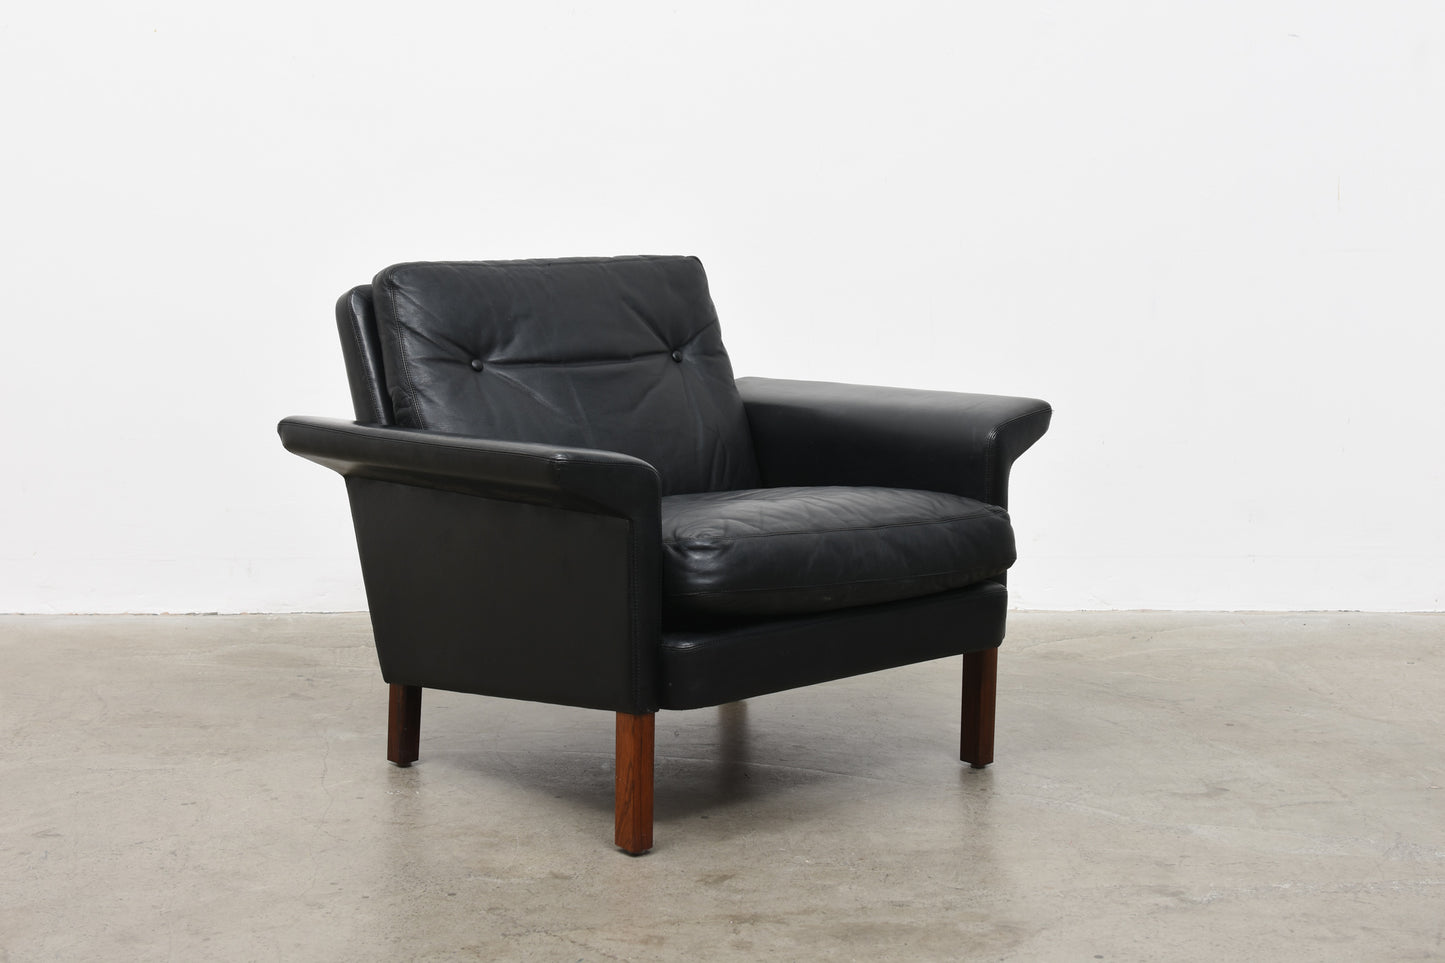 Low back leather lounger by Hans Olsen